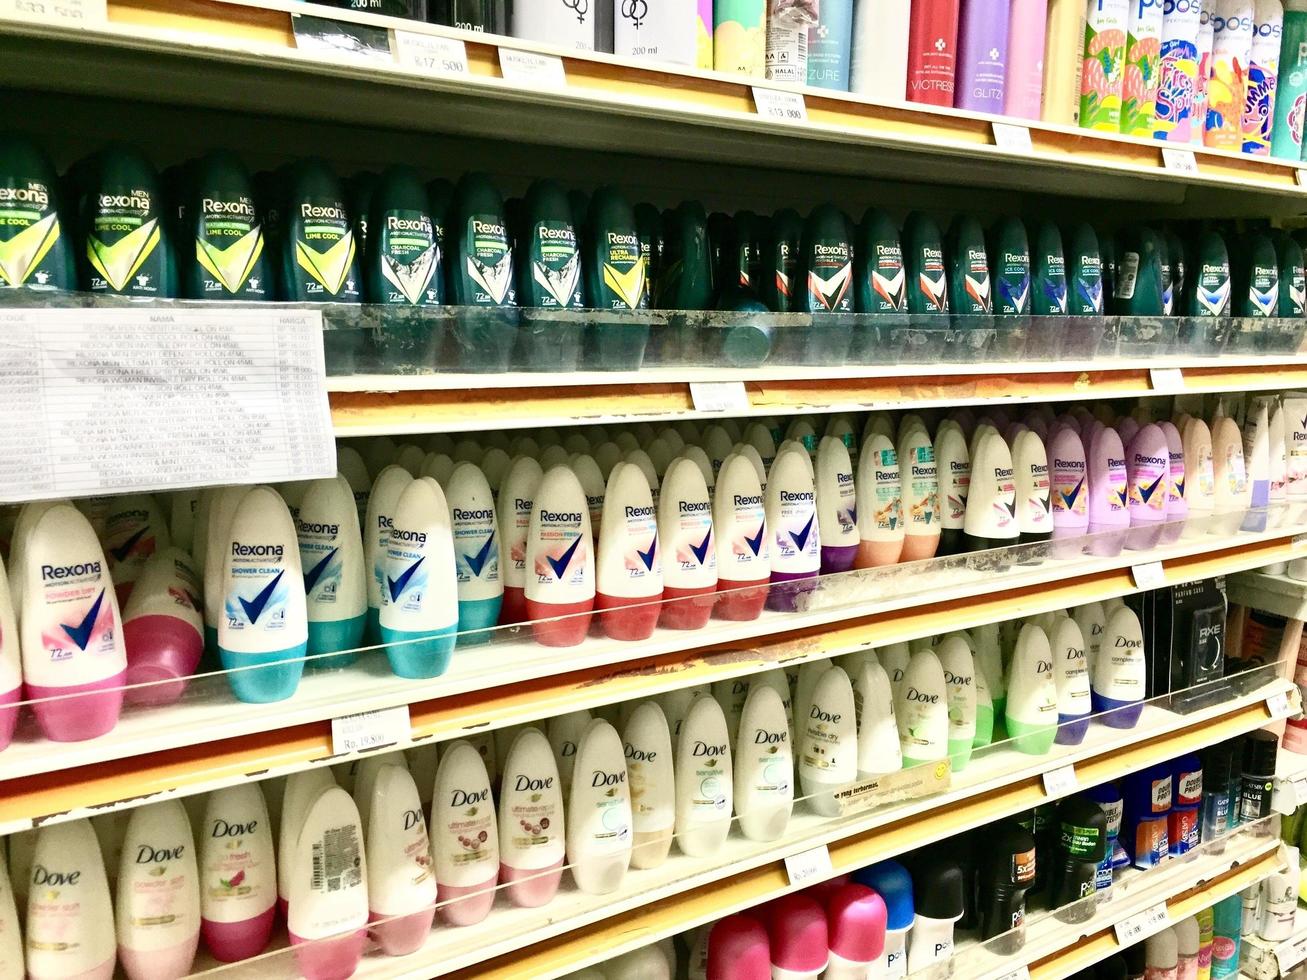 Rexona Deodorant, row of deodorant products in a supermarket window, suitable for editorial needs, Batam, Indonesia-April 2023 photo